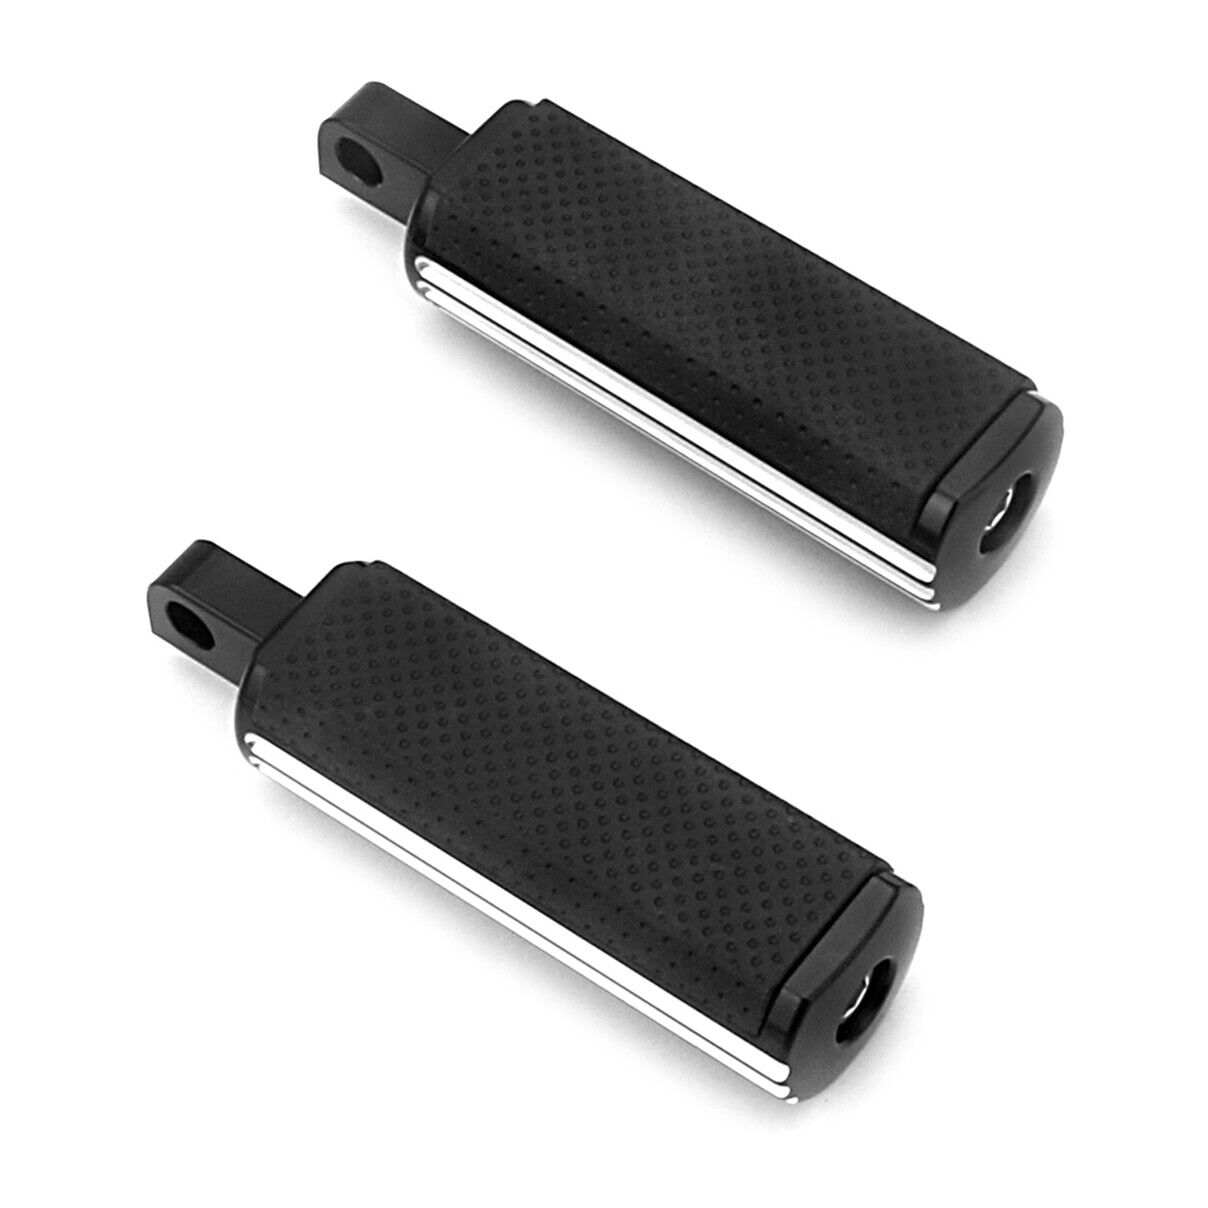 Defiance passenger foot peg for Harley Softail Touring street road heritage Dyna